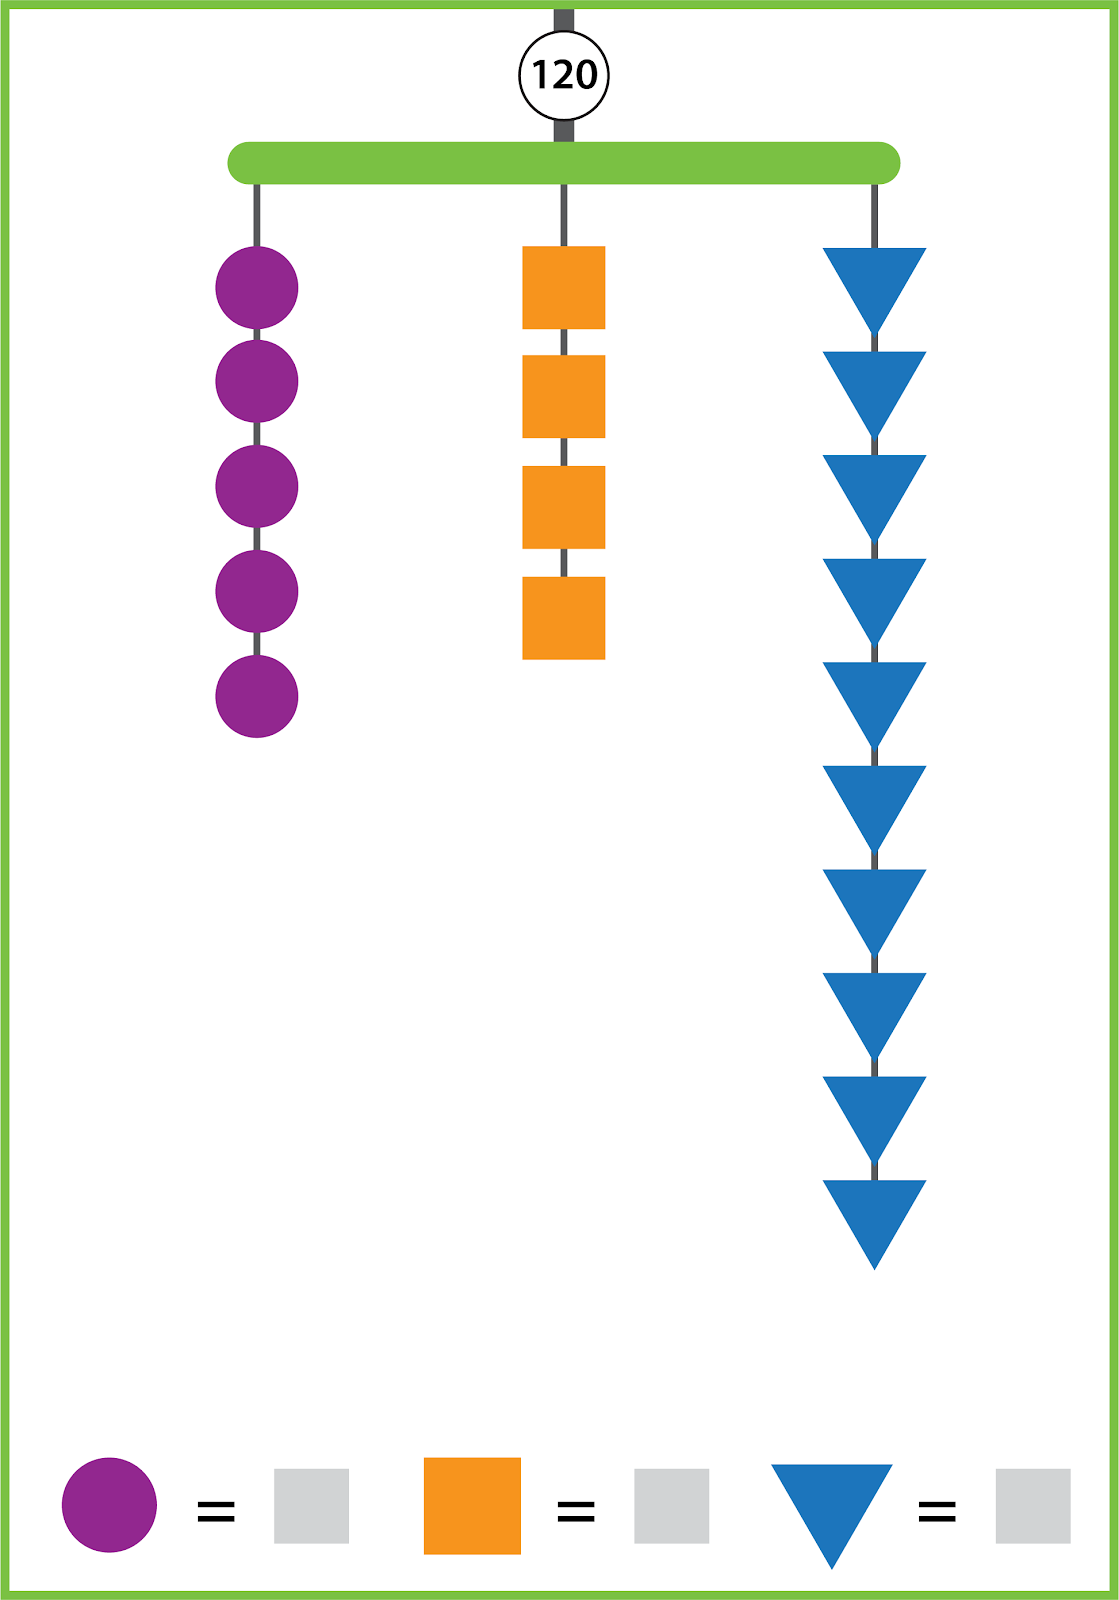 A balanced mobile has three strings and a total value of 120. The left string has 5 purple circles. The middle string has 4 orange squares. The right string has 10 blue triangles. The values of the shapes are unknown.